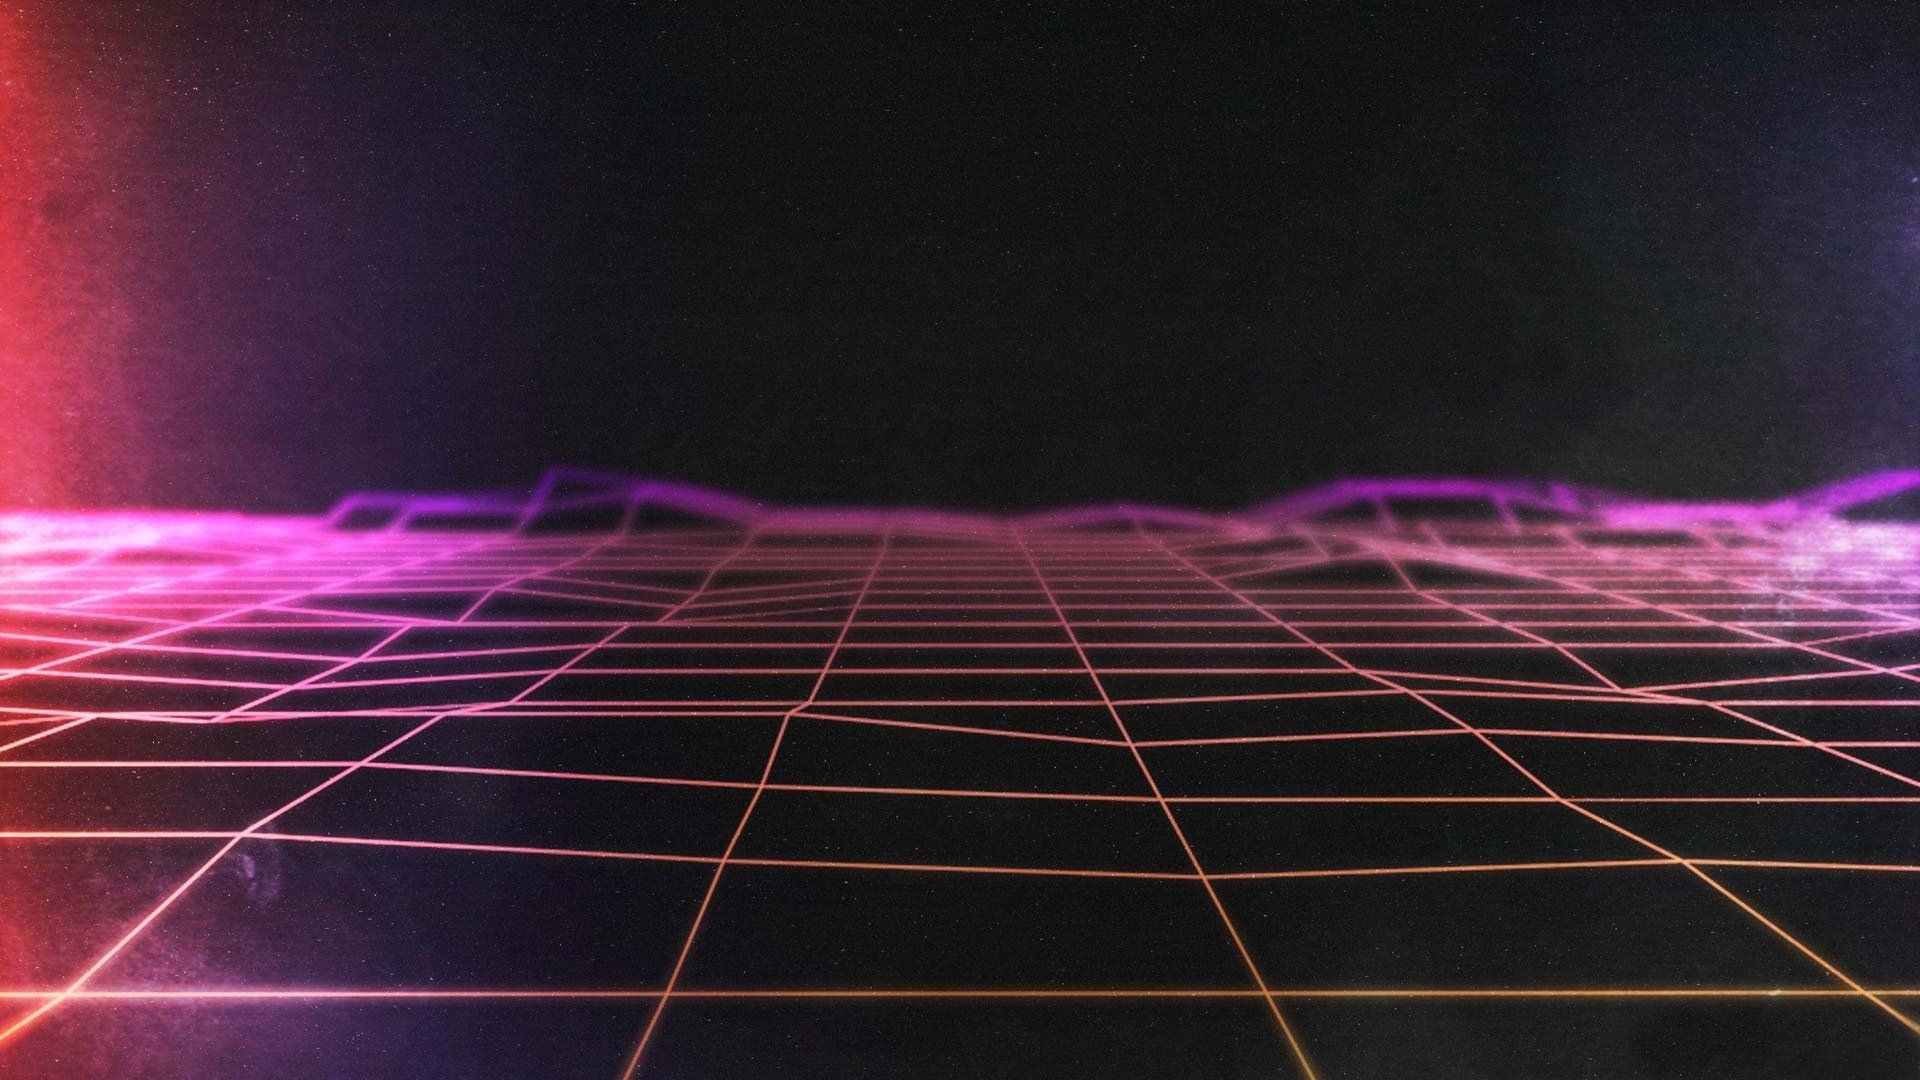 A neon grid with purple and red lights - 1920x1080, neon, arcade, synthwave